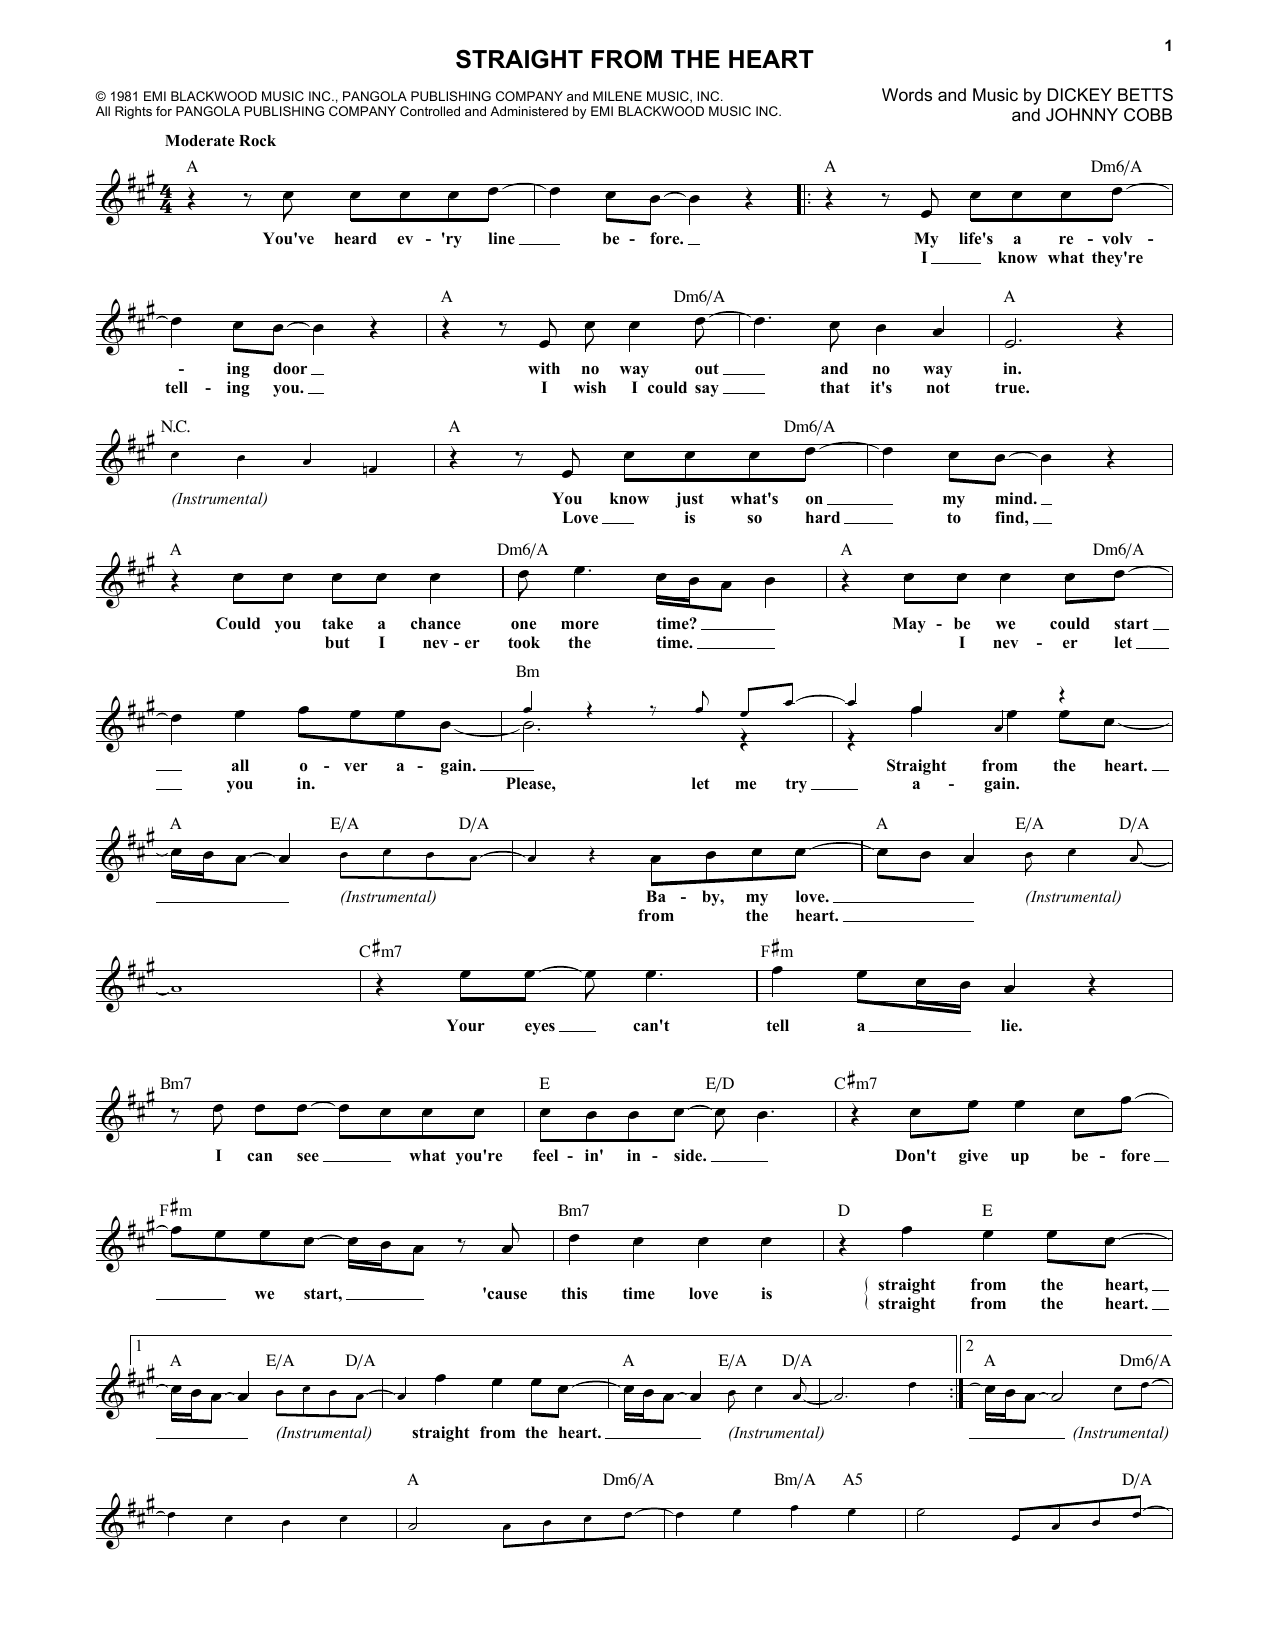 Download The Allman Brothers Band Straight From The Heart Sheet Music